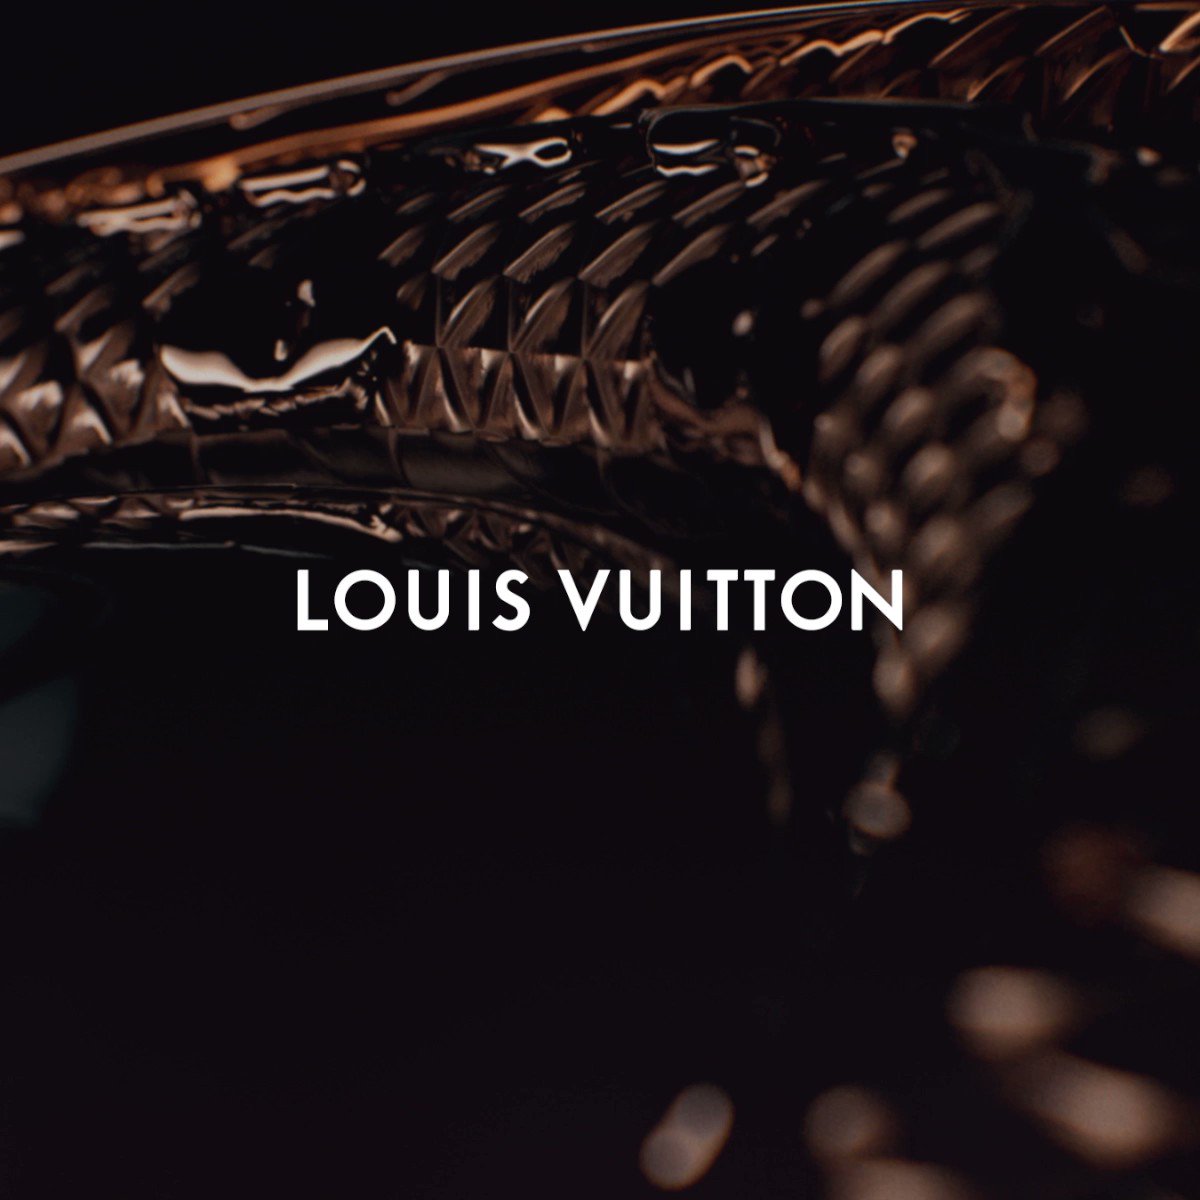 Louis Vuitton on X: High Watchmaking by #LouisVuitton. As a tribute to  Bian Lian, the art of face-changing of the Sichuan Opera, the new Tambour  Opera Automata features an on-demand artistic performance.